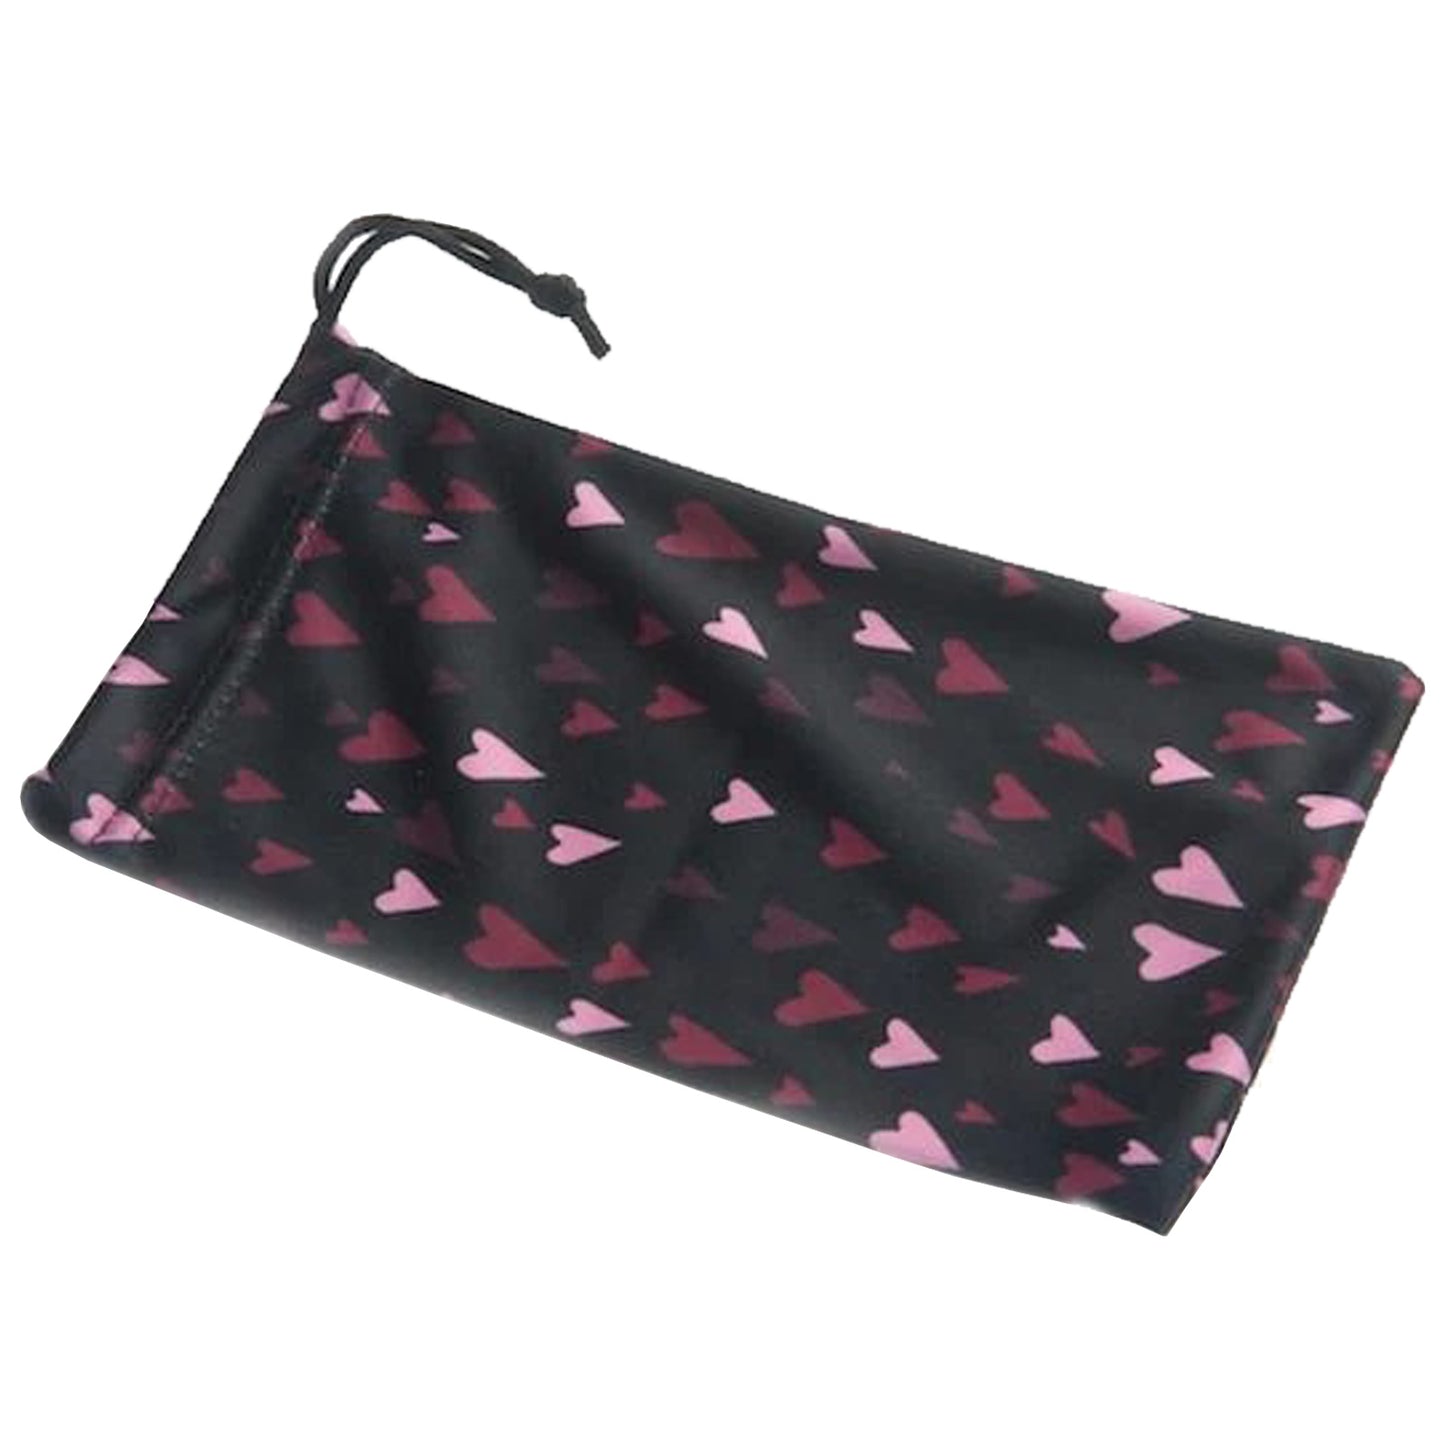 Eyelevel Pouch - Pink Hearts